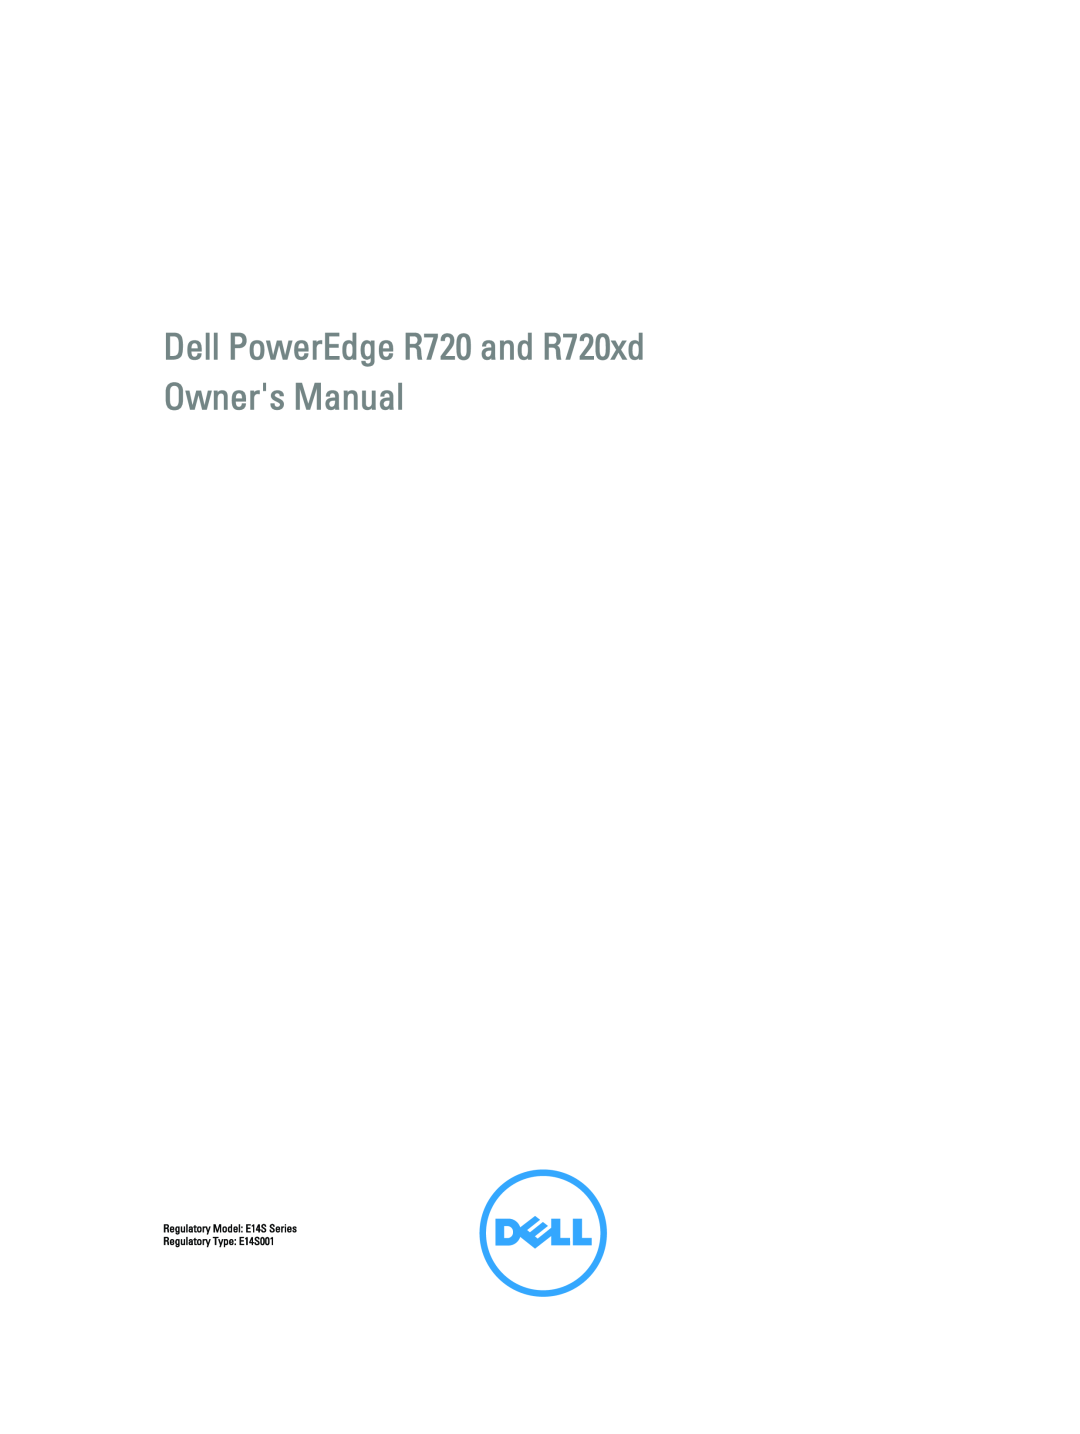 Dell R720XD owner manual Dell PowerEdge R720 and R720xd Owners Manual, Regulatory Model: E14S Series 